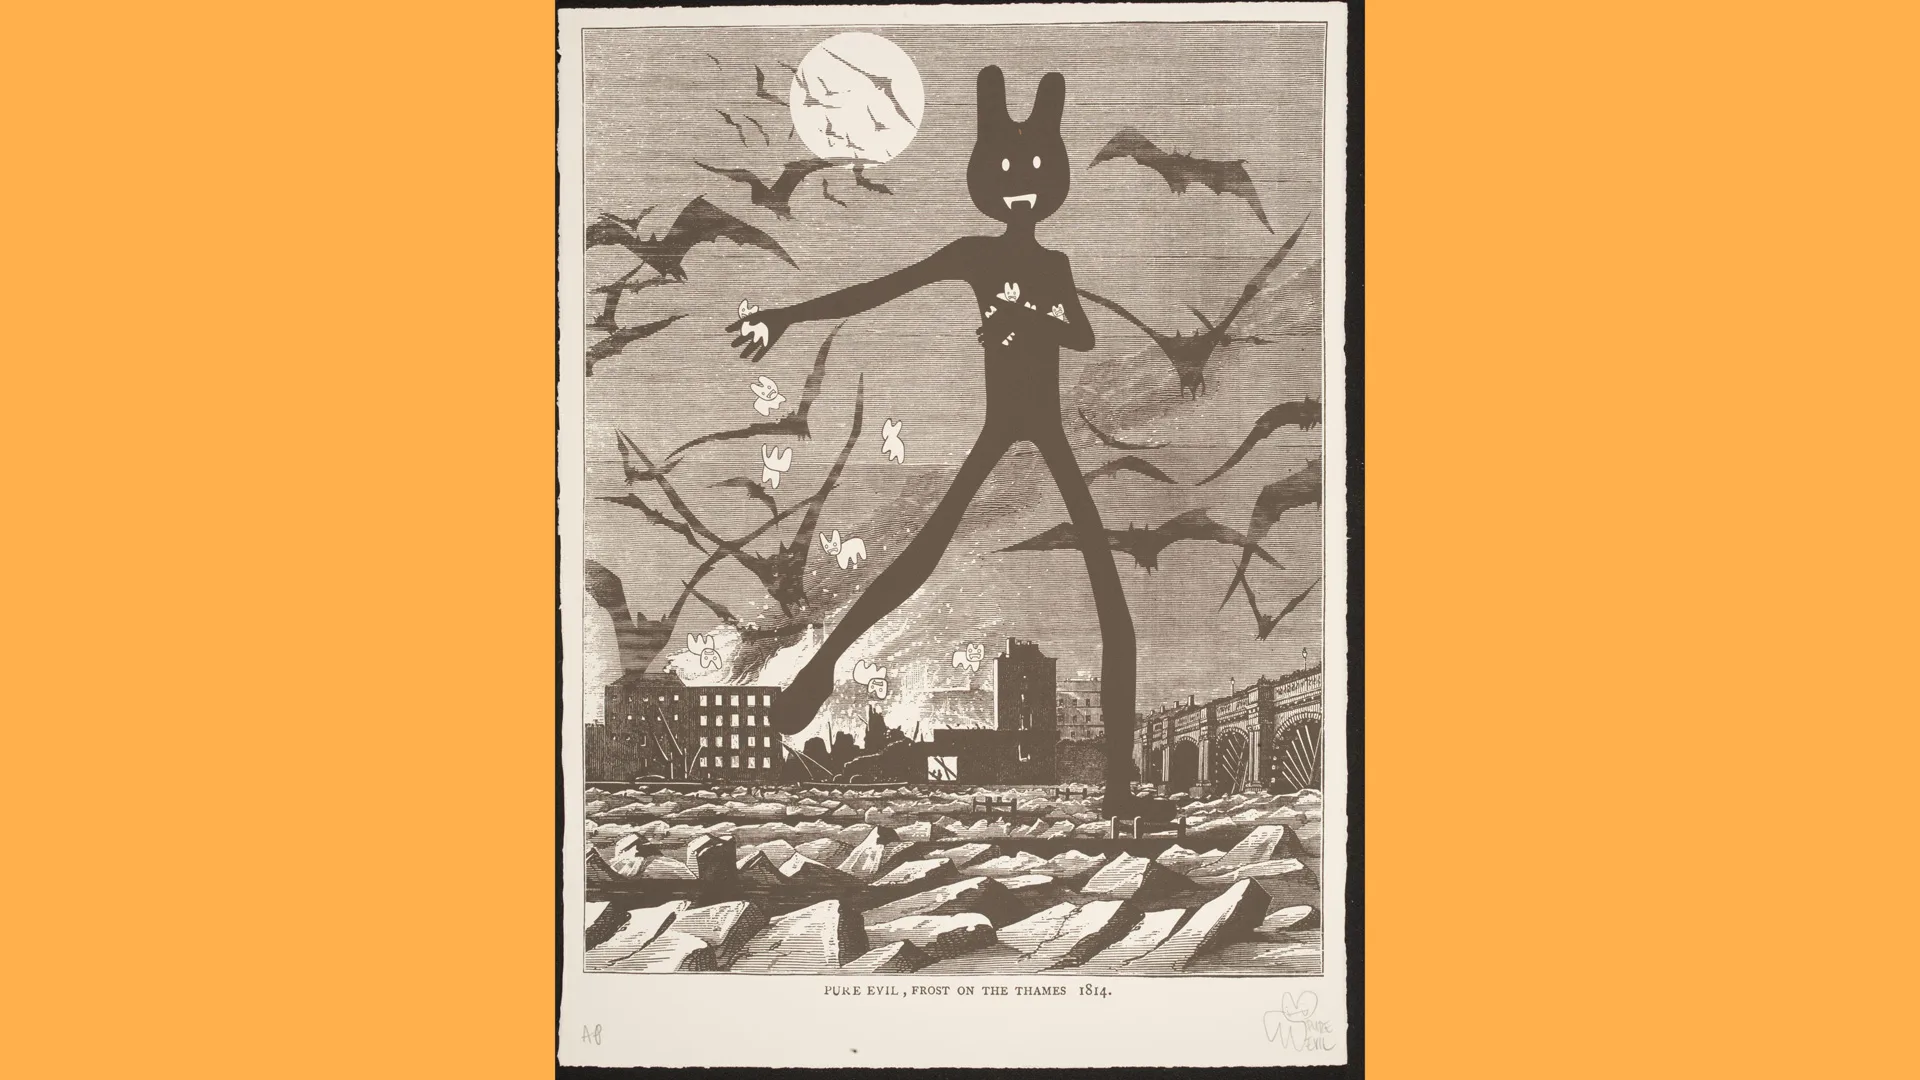 A print of a giant vampire bunny walking through London against a moonlit night and bats flying in the air, dropping people into the Thames river.